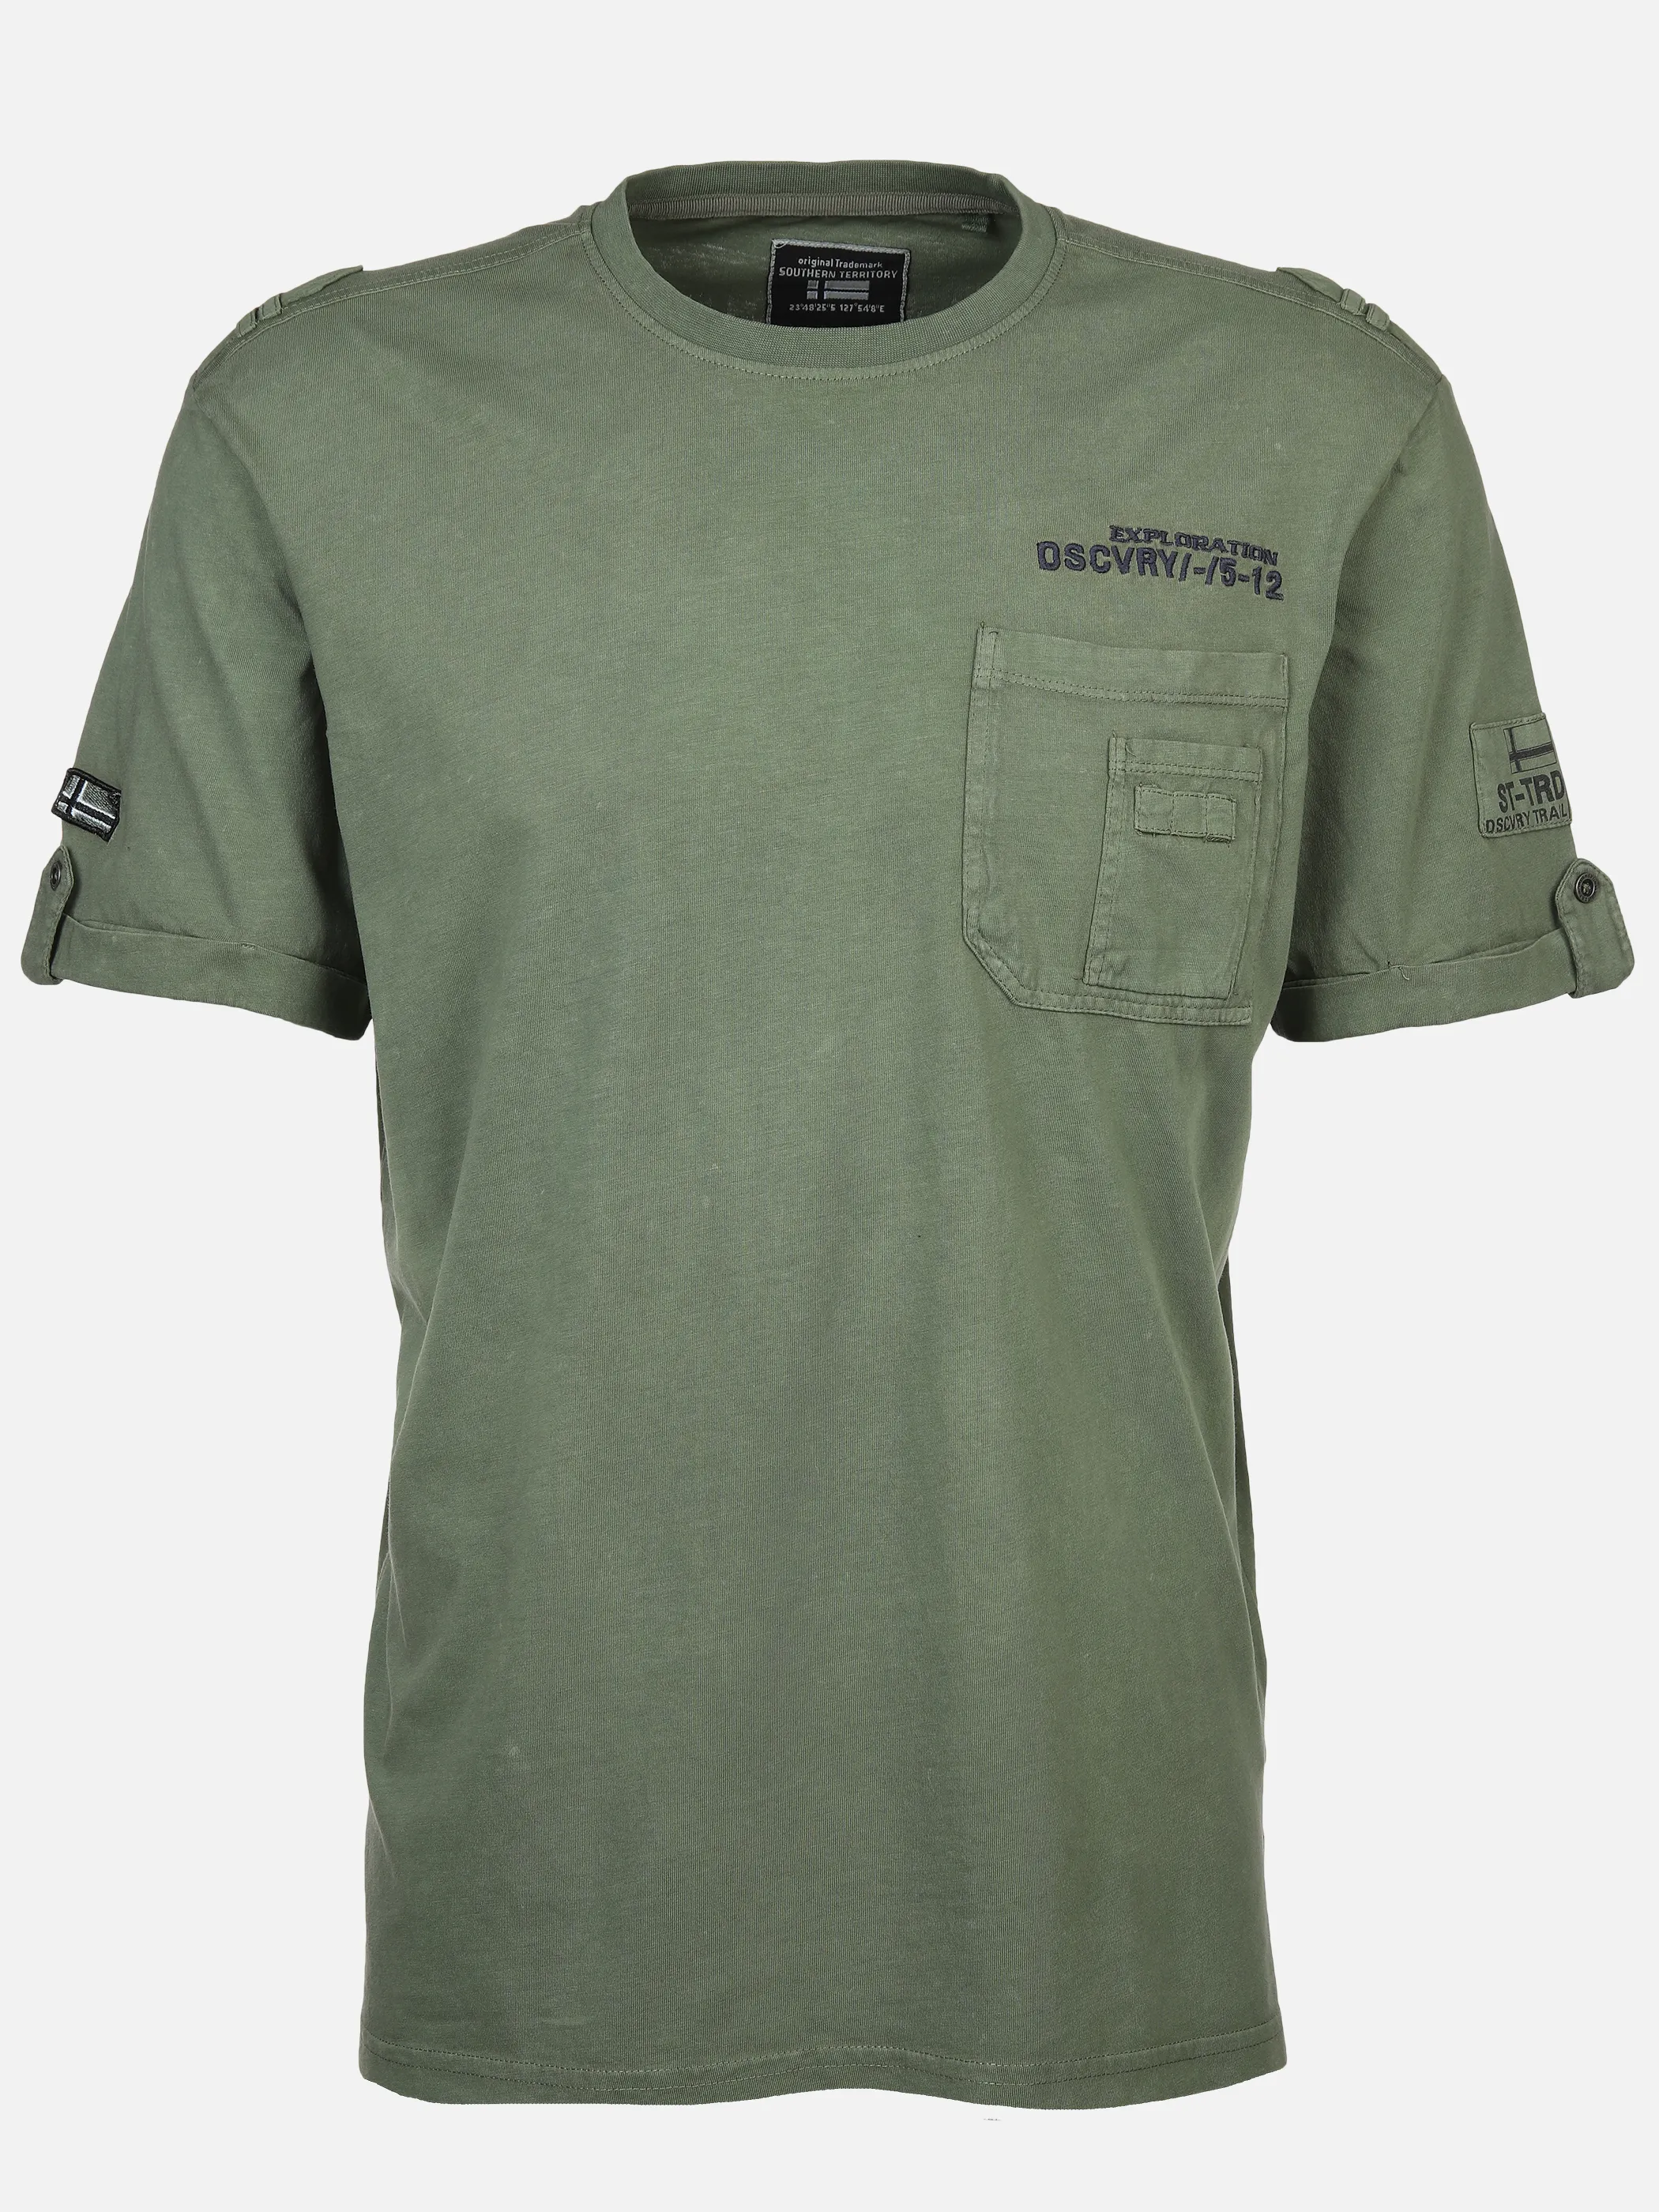 Southern Territory He. T-Shirt 1/2 Arm Cargo Oliv 893223 OLIVE 1